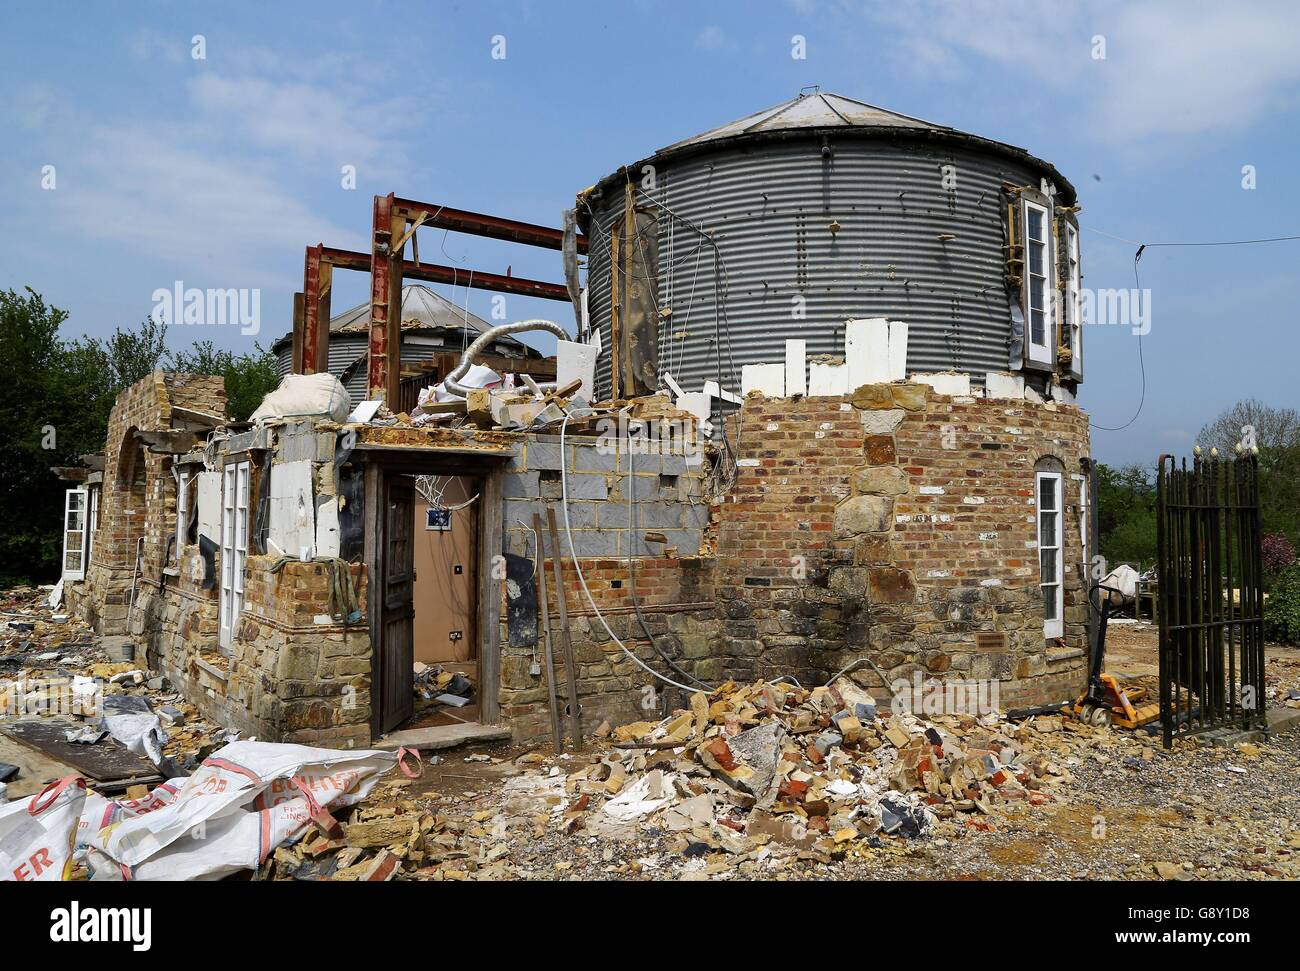 A view of the home of cattle farmer Robert Fidler on his farm in Salfords near Redhill in Surrey, as the process of demolishing the property continues after he lost a ten year court battle to save the property. Stock Photo